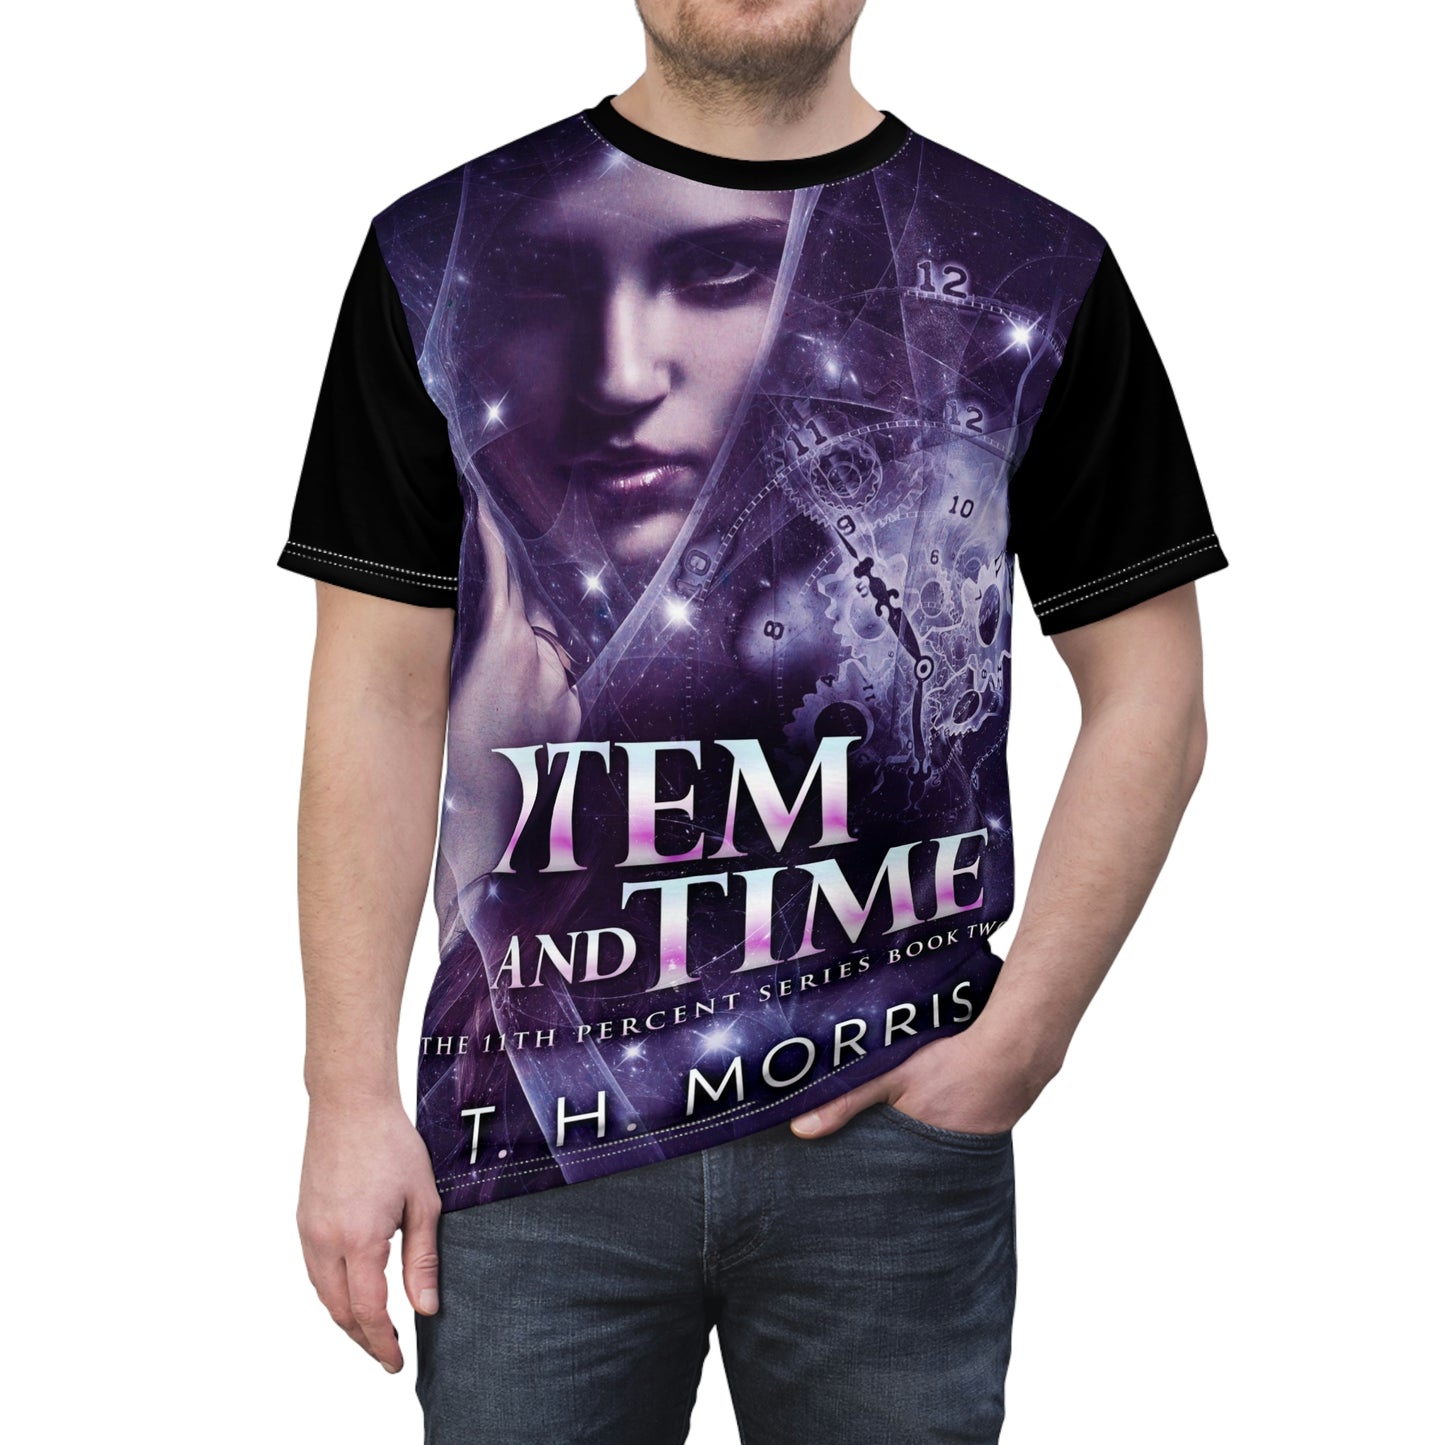 Item and Time - Unisex All-Over Print Cut & Sew T-Shirt